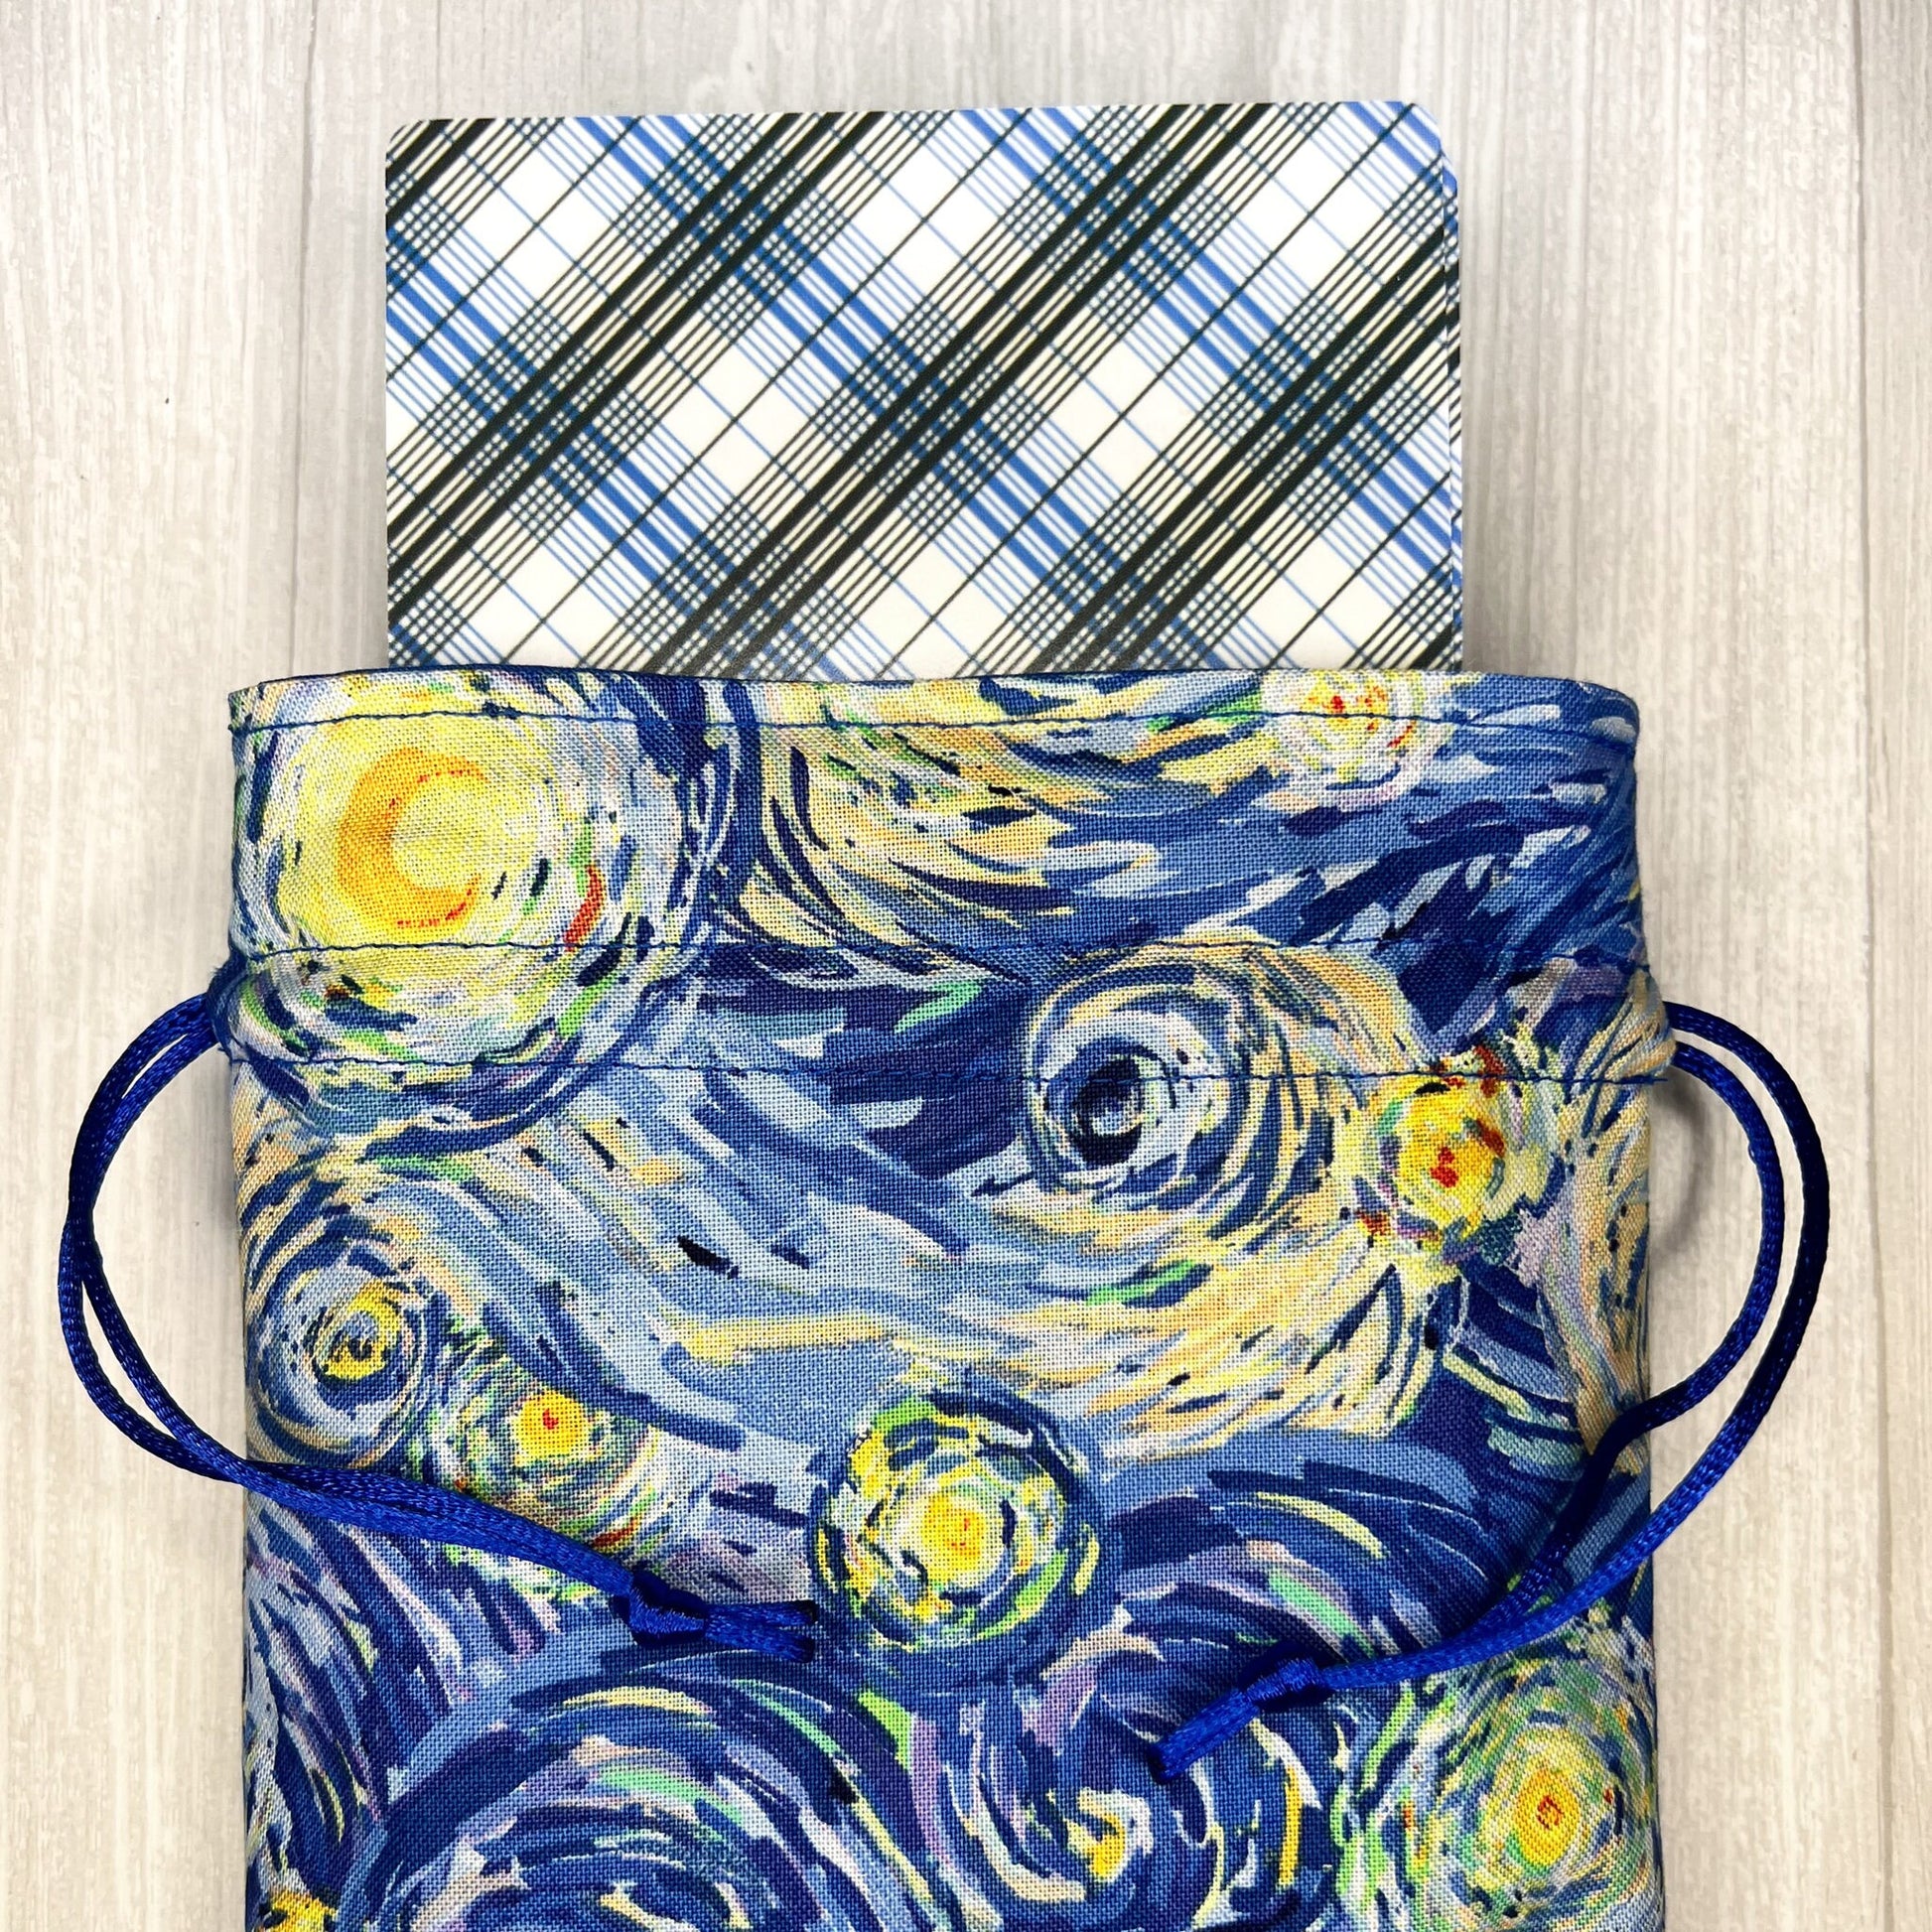 Large Starry Night Tarot Deck Bag, Blue Oracle Card Drawstring Pouch, Deck Storage Holder, Pagan Witchcraft Divination Tool Gifts & Supplies